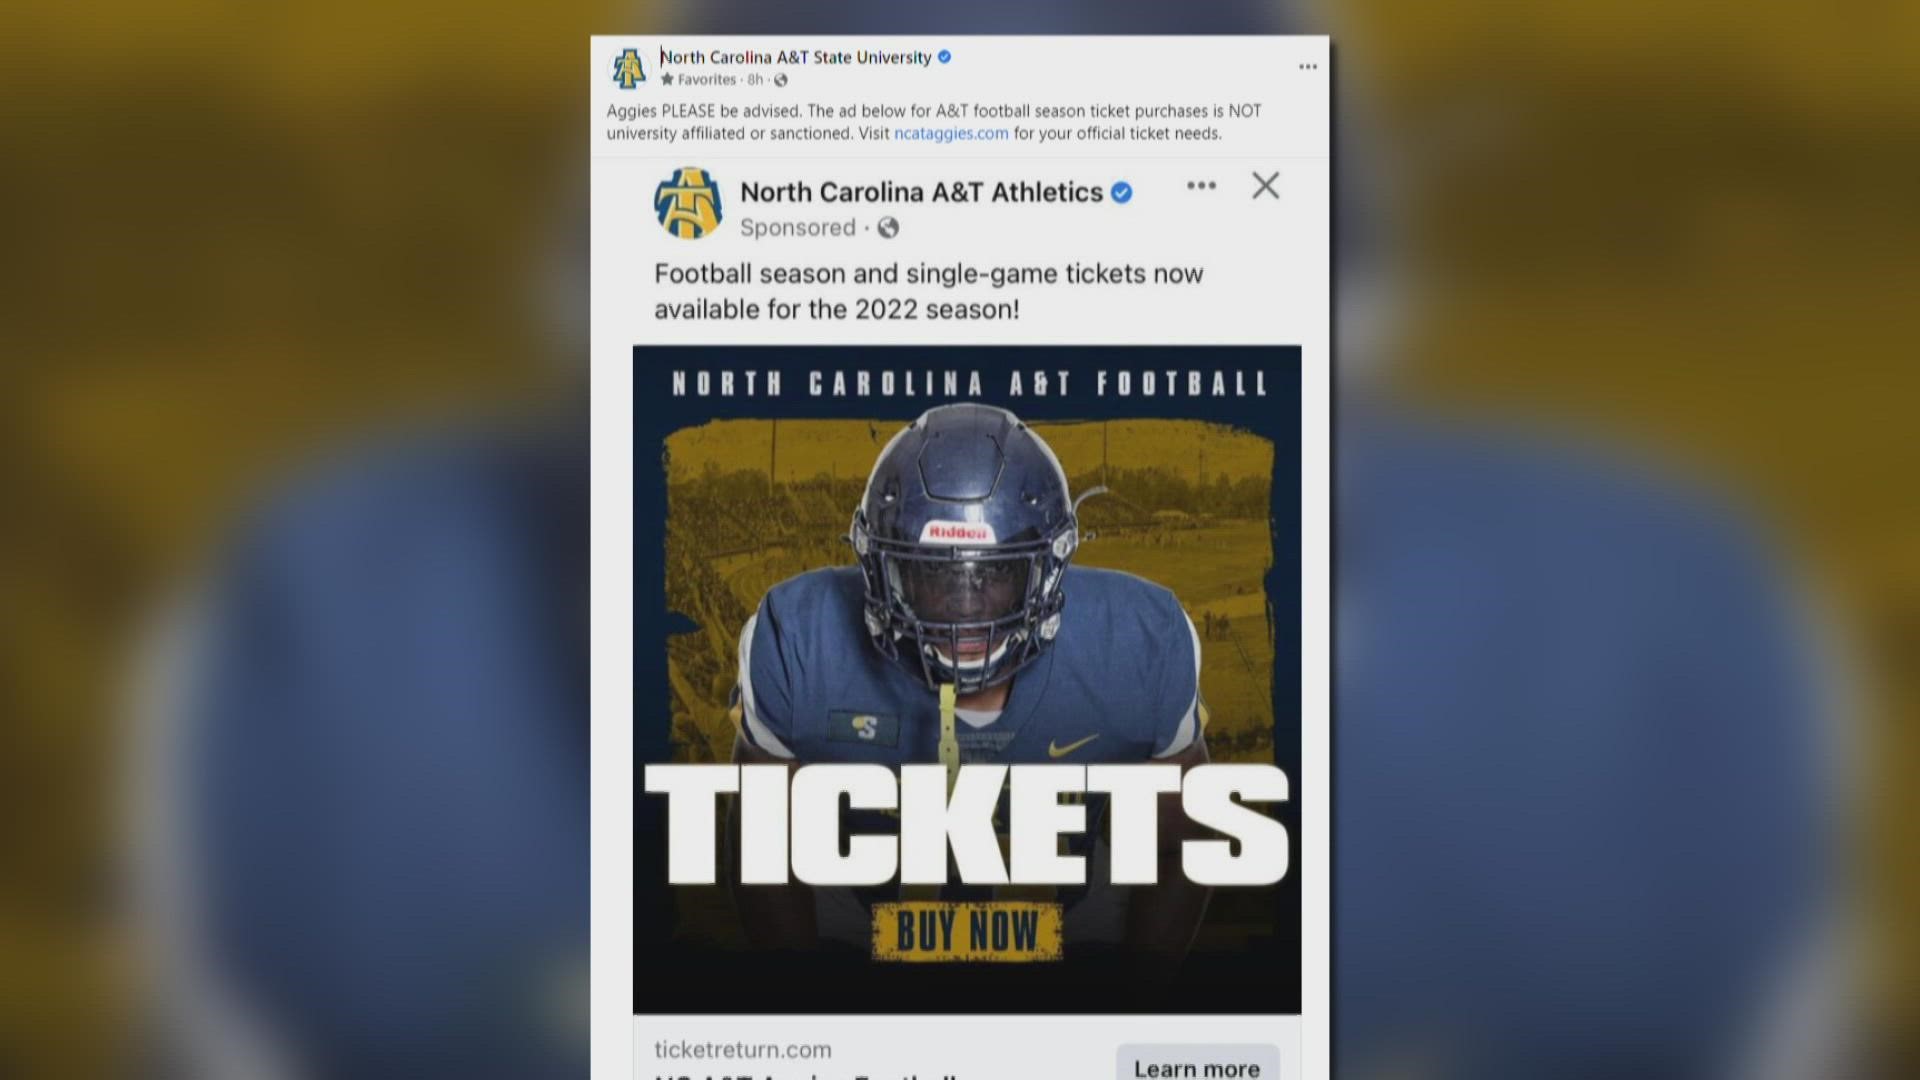 The university said a sponsored post claims to sell football tickets, but it is a fraud.